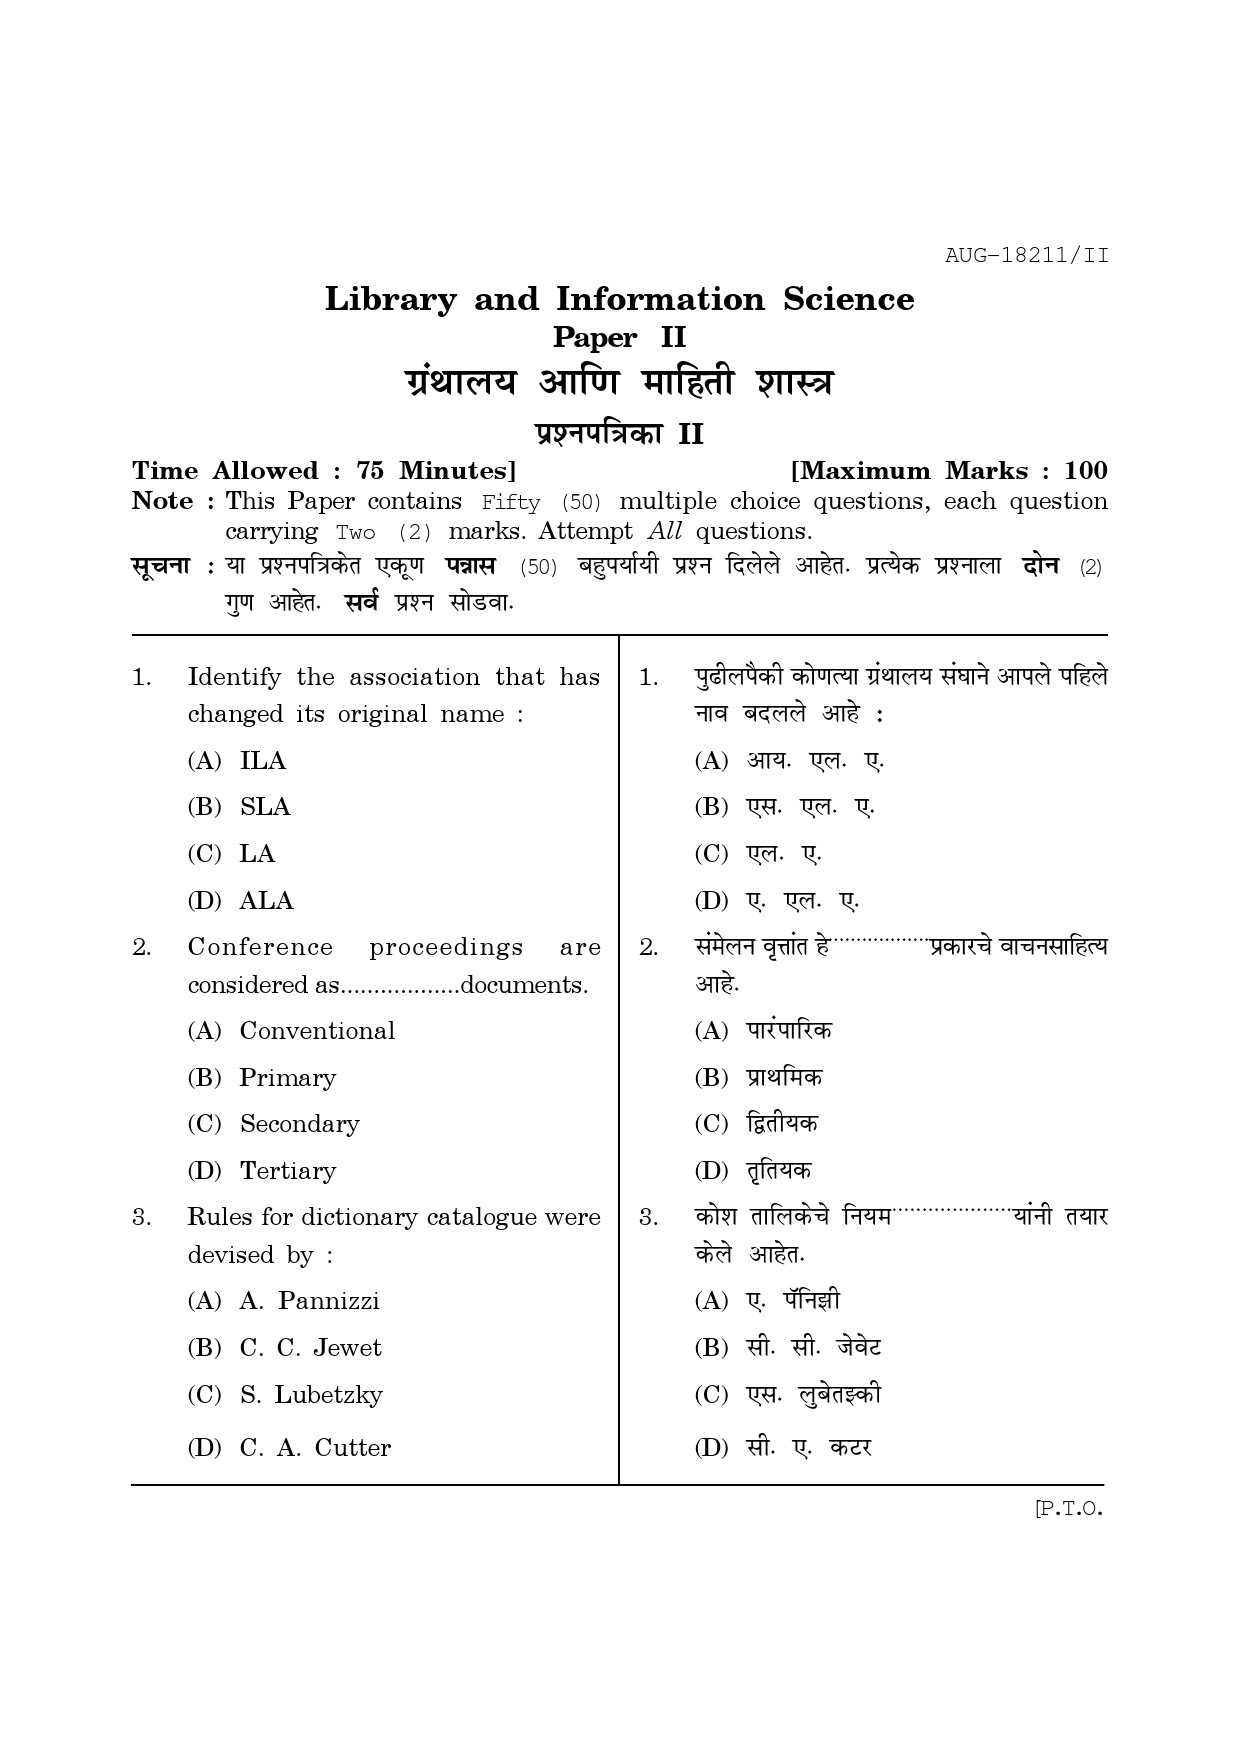 Maharashtra SET Library Information Science Question Paper II August 2011 1